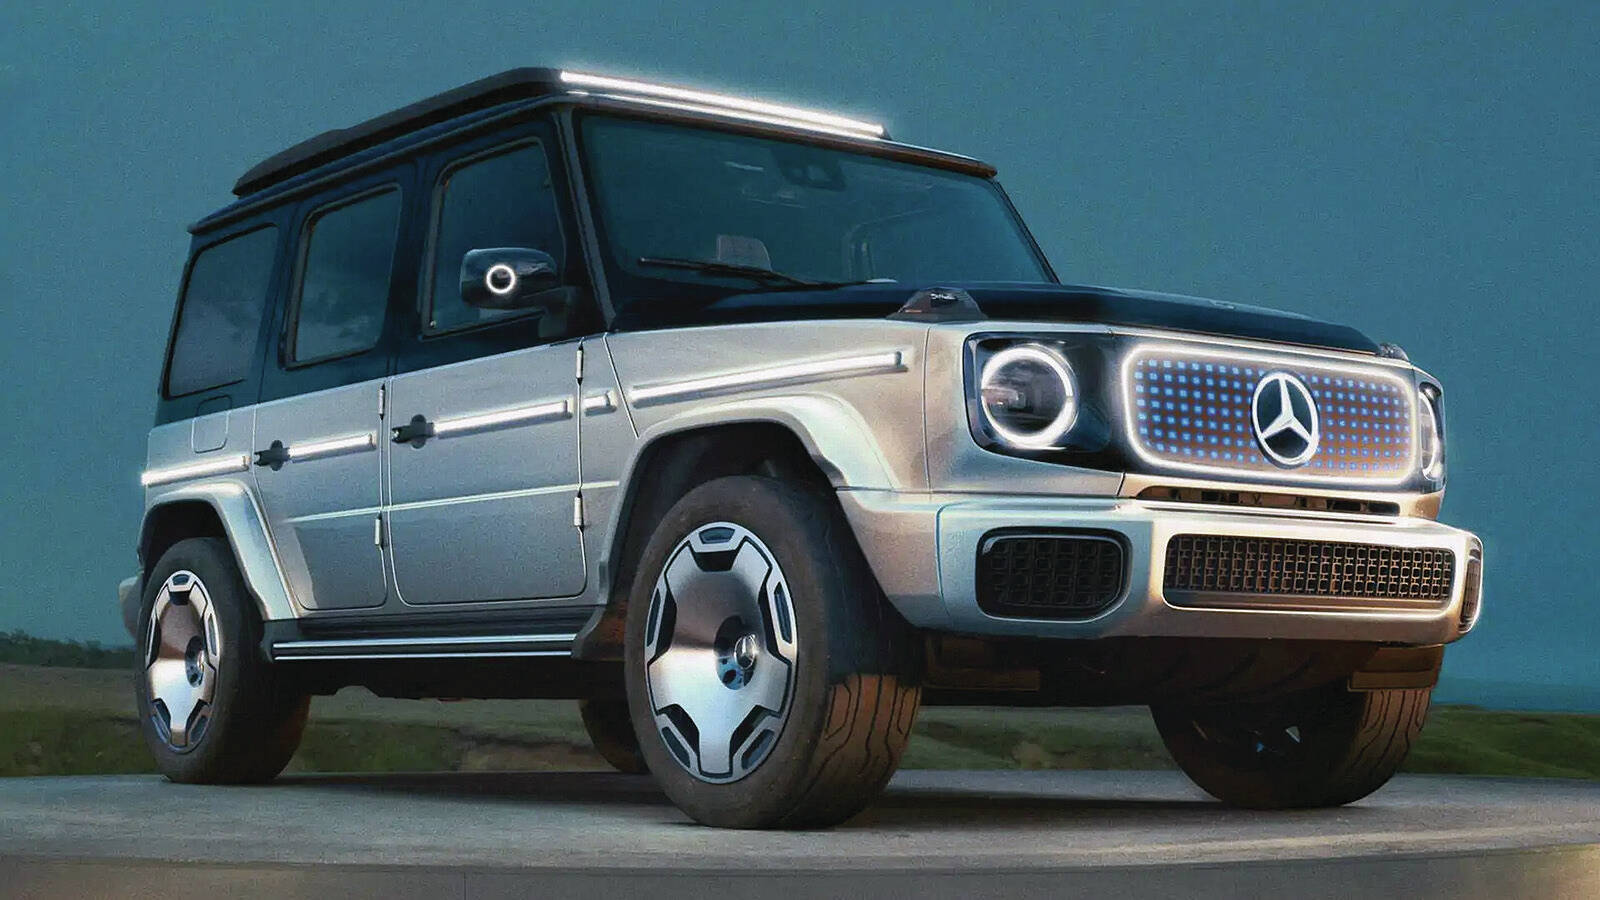 The EQG (concept pictured) resembles the current G-Class, except for an illuminated panel and oversized Mercedes-Benz logo that replaces the grille. PHOTO: MERCEDES-BENZ